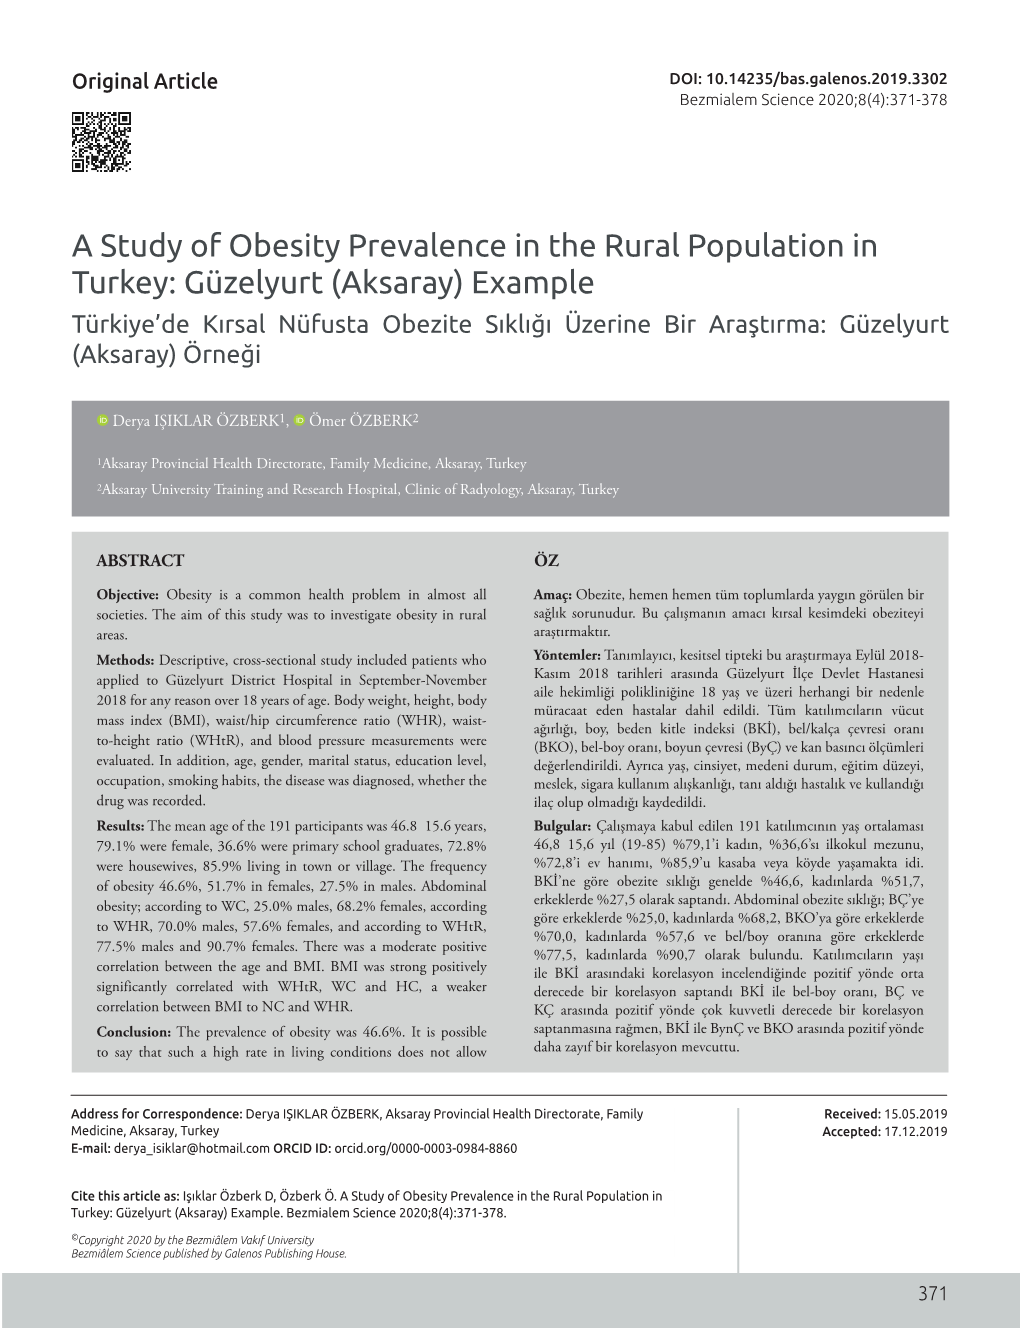 A Study of Obesity Prevalence in the Rural Population in Turkey